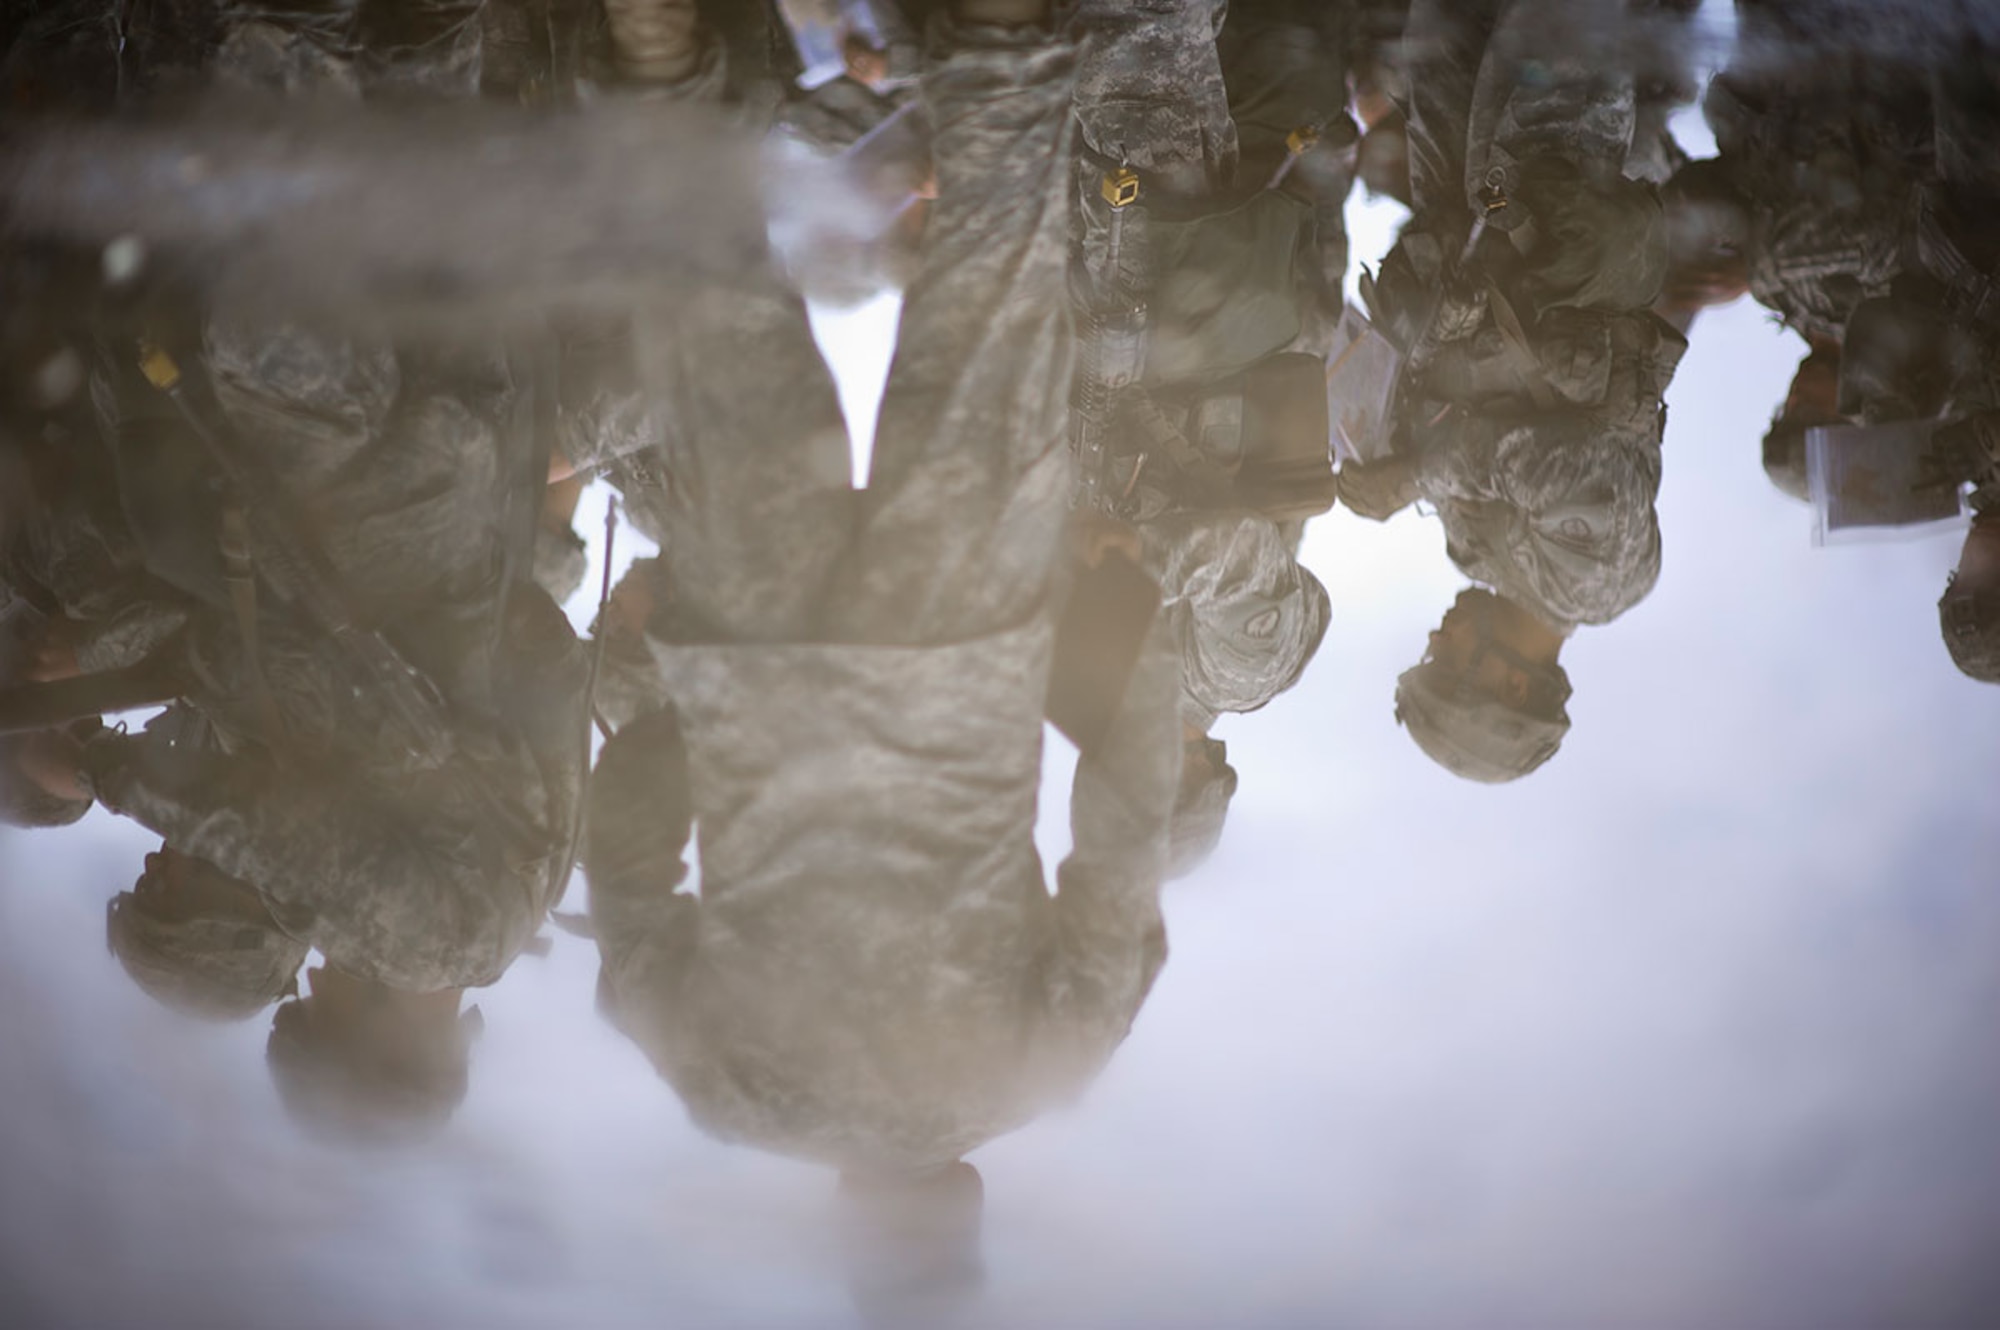 Parachute infantrymen assigned to U.S. Army Alaska's 4th Infantry Brigade Combat Team (Airborne), 25th Infantry Division, are seen reflected in a pool of rain water as they prepare to test on the land navigation course during Expert Infantryman Badge qualification on Joint Base Elmendorf-Richardson, Tuesday, Sept. 9, 2014. The Expert Infantryman Badge was approved by the Secretary of War on October 7, 1943, and is currently awarded to U.S. Army personnel who hold infantry or special forces military occupational specialties and successfully pass the rigors of the course. (U.S. Air Force photo/Justin Connaher)